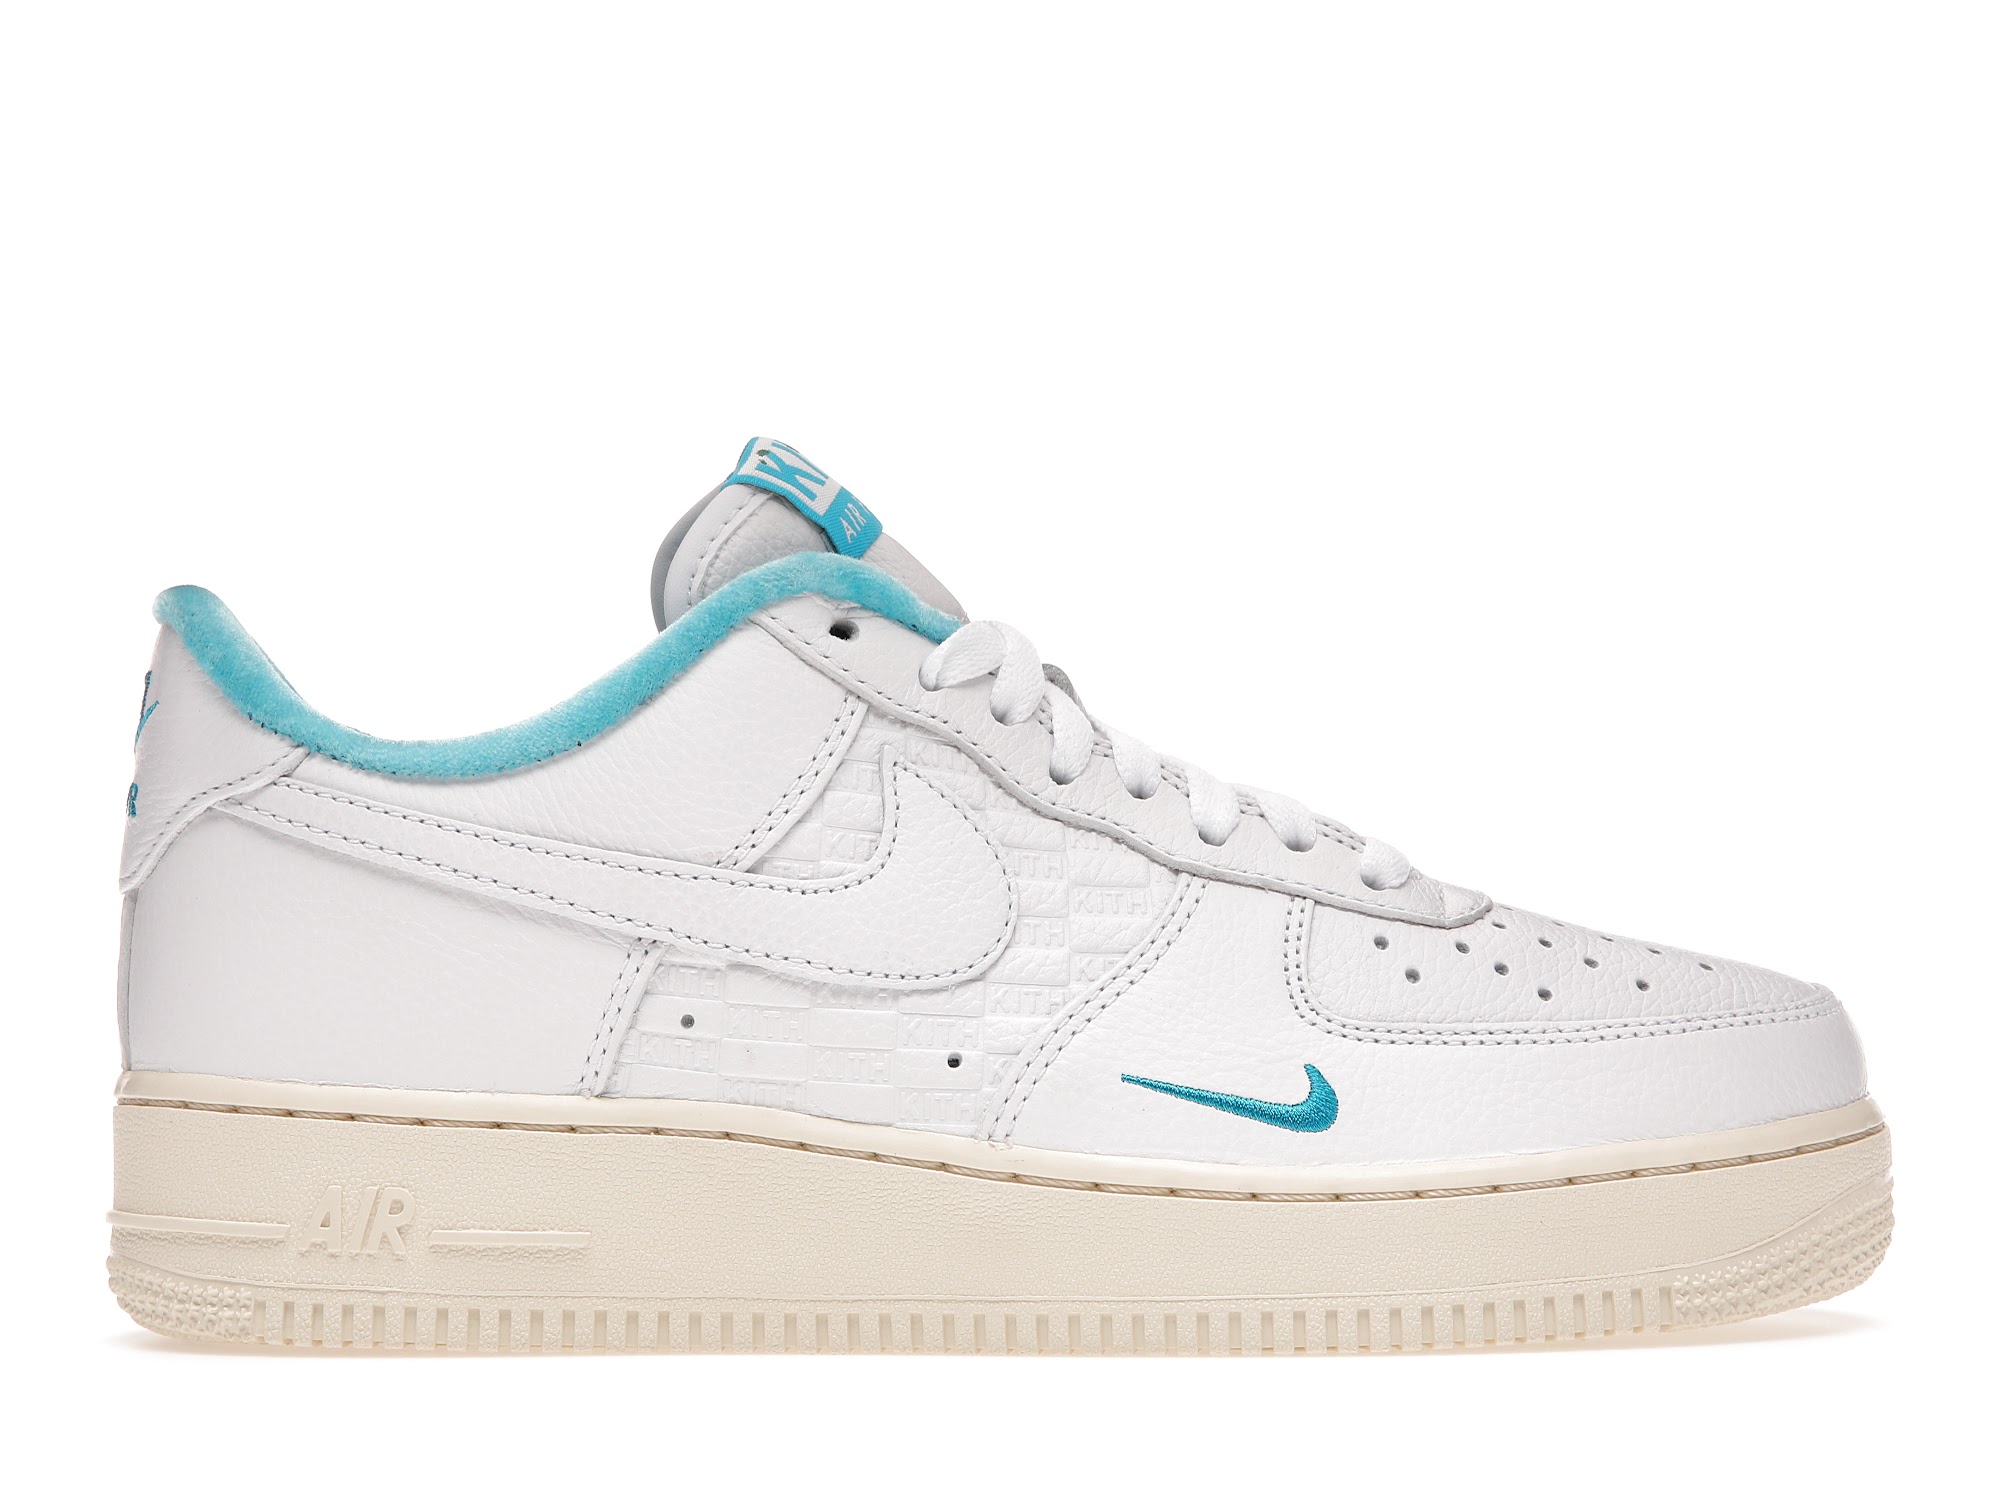 NIKE AIR FORCE 1 LOW / KITH 27.5cm